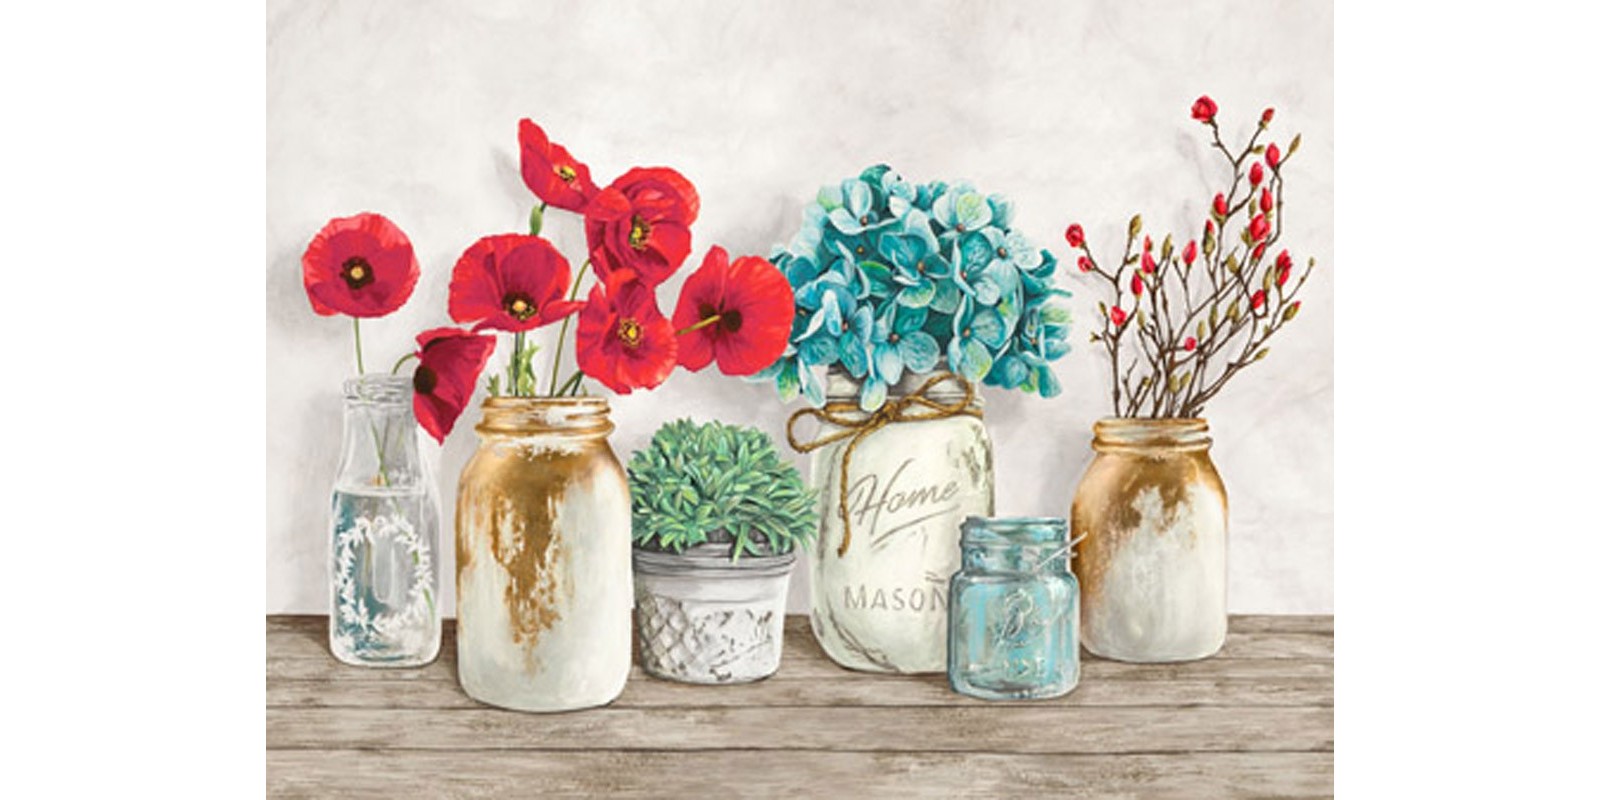 JENNY THOMLINSON - Floral composition with Mason Jars